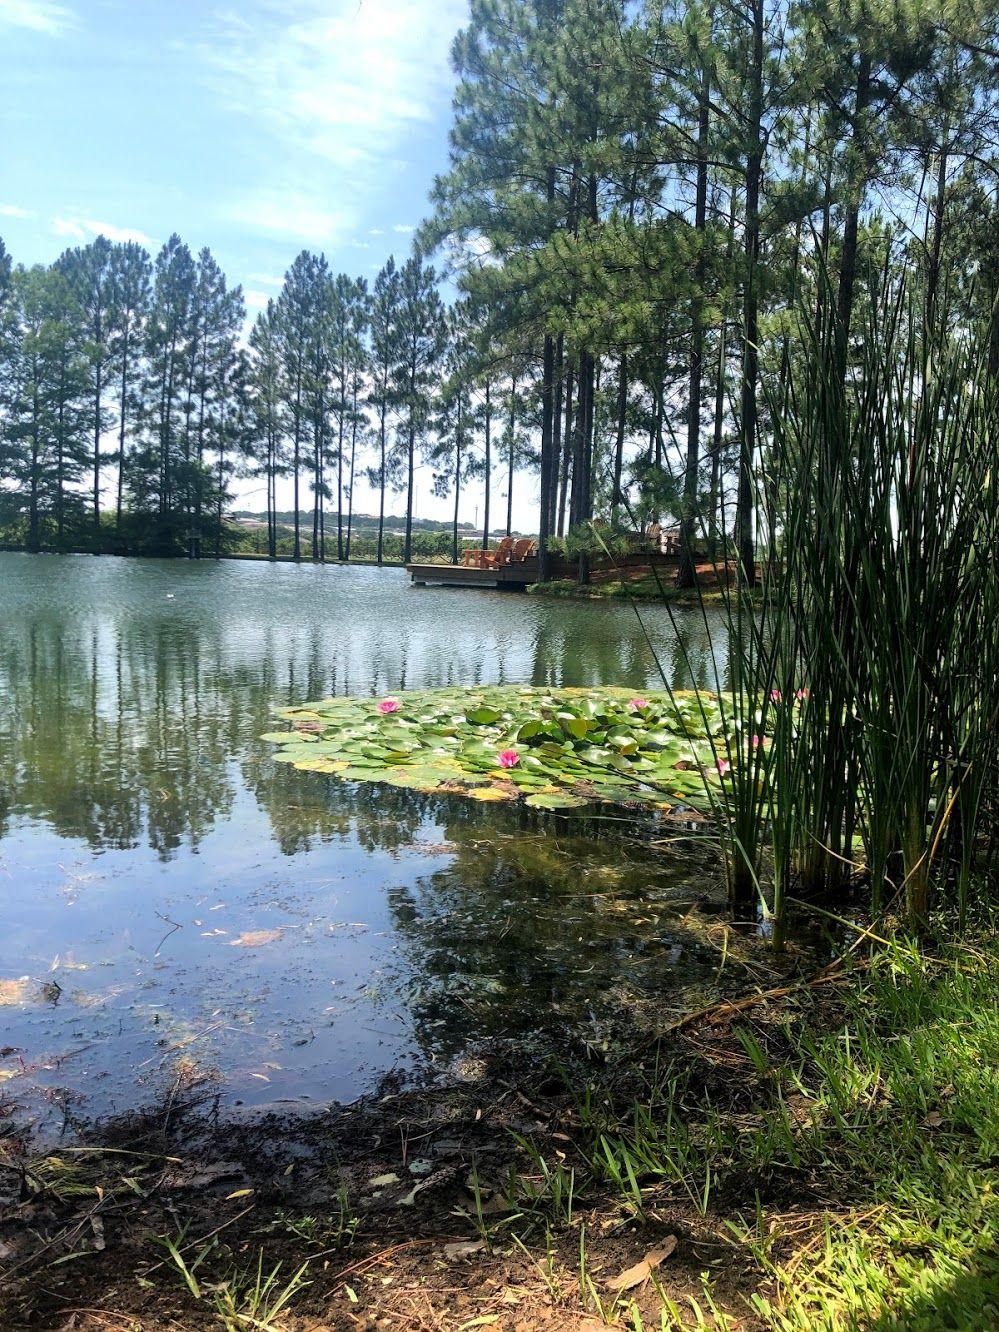 A view of the pond behind Das Peach Haus. There are lily pads with a few pink flowers and tall green trees surrounding the pond.